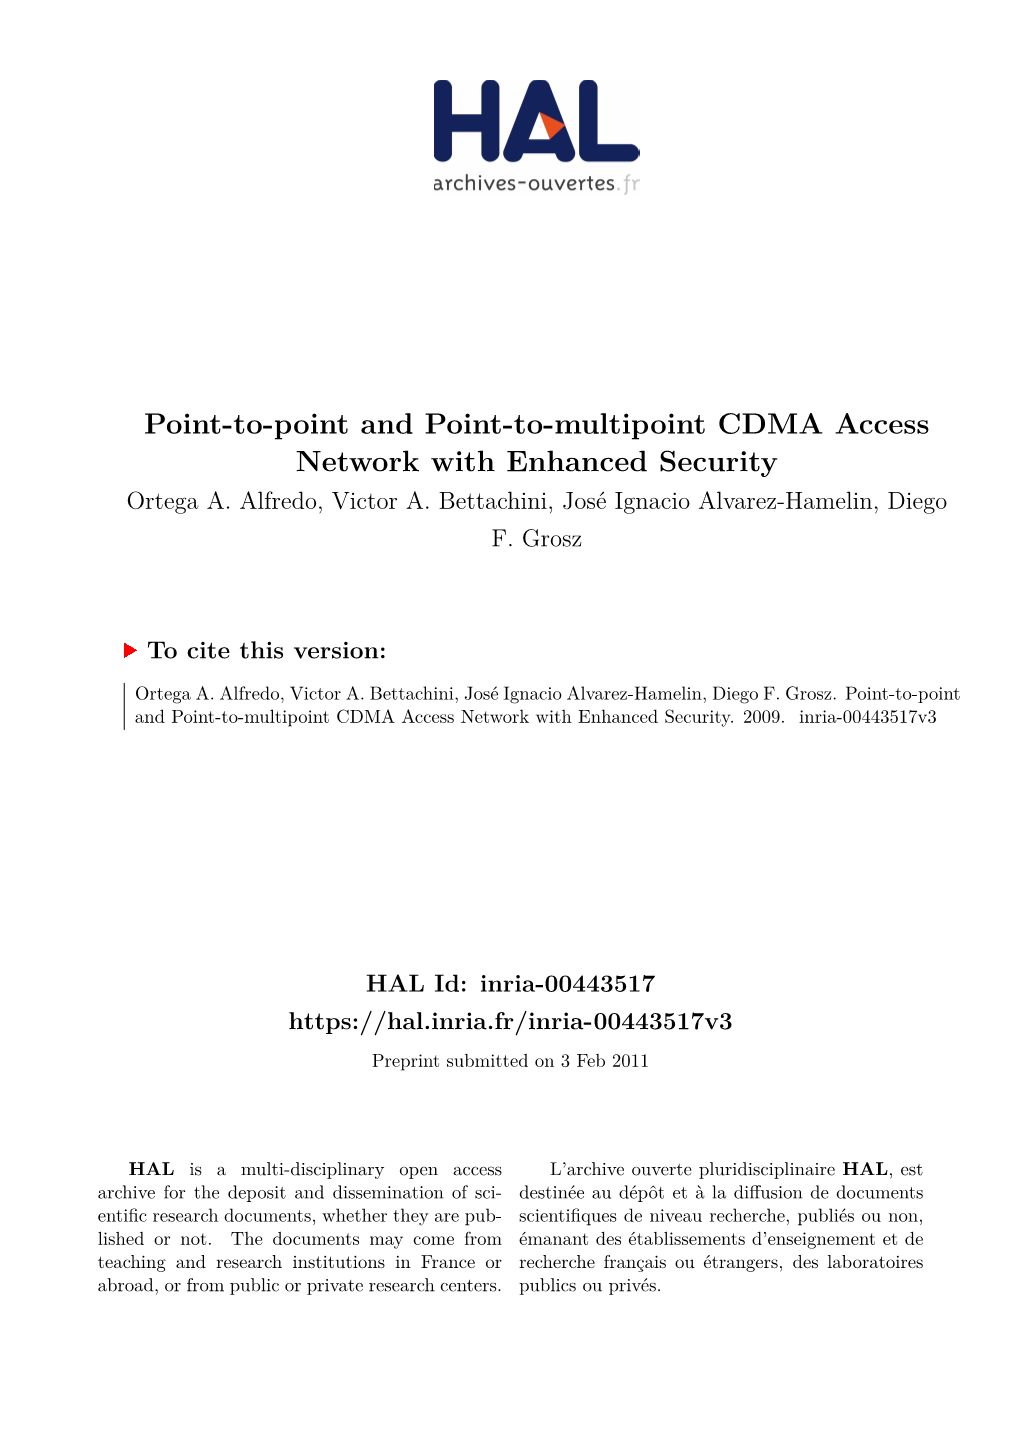 Point-To-Point and Point-To-Multipoint CDMA Access Network with Enhanced Security Ortega A